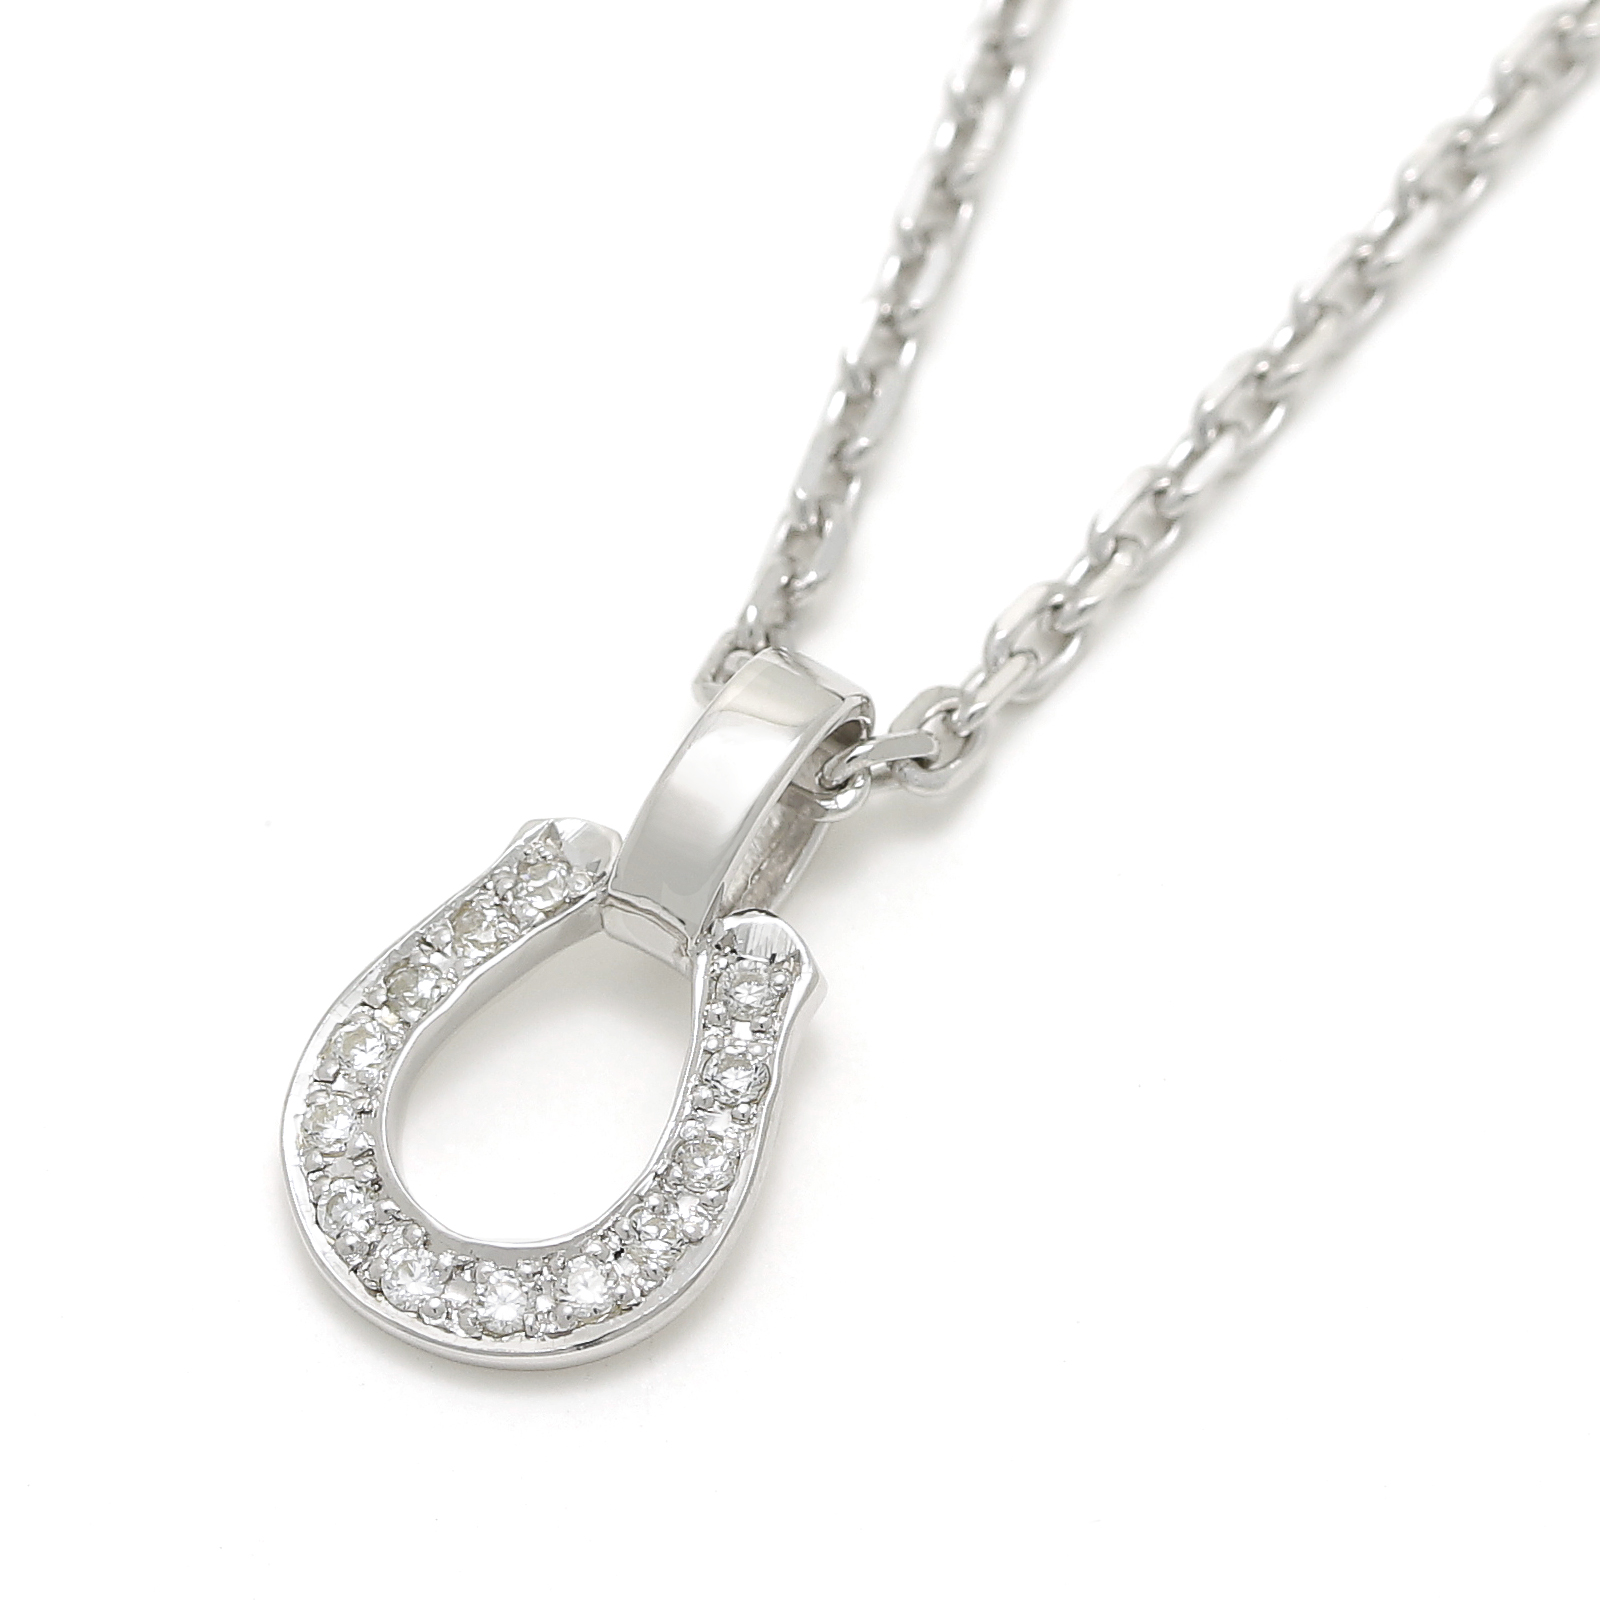 Small Charm Necklace - Horseshoe - Silver w/CZ